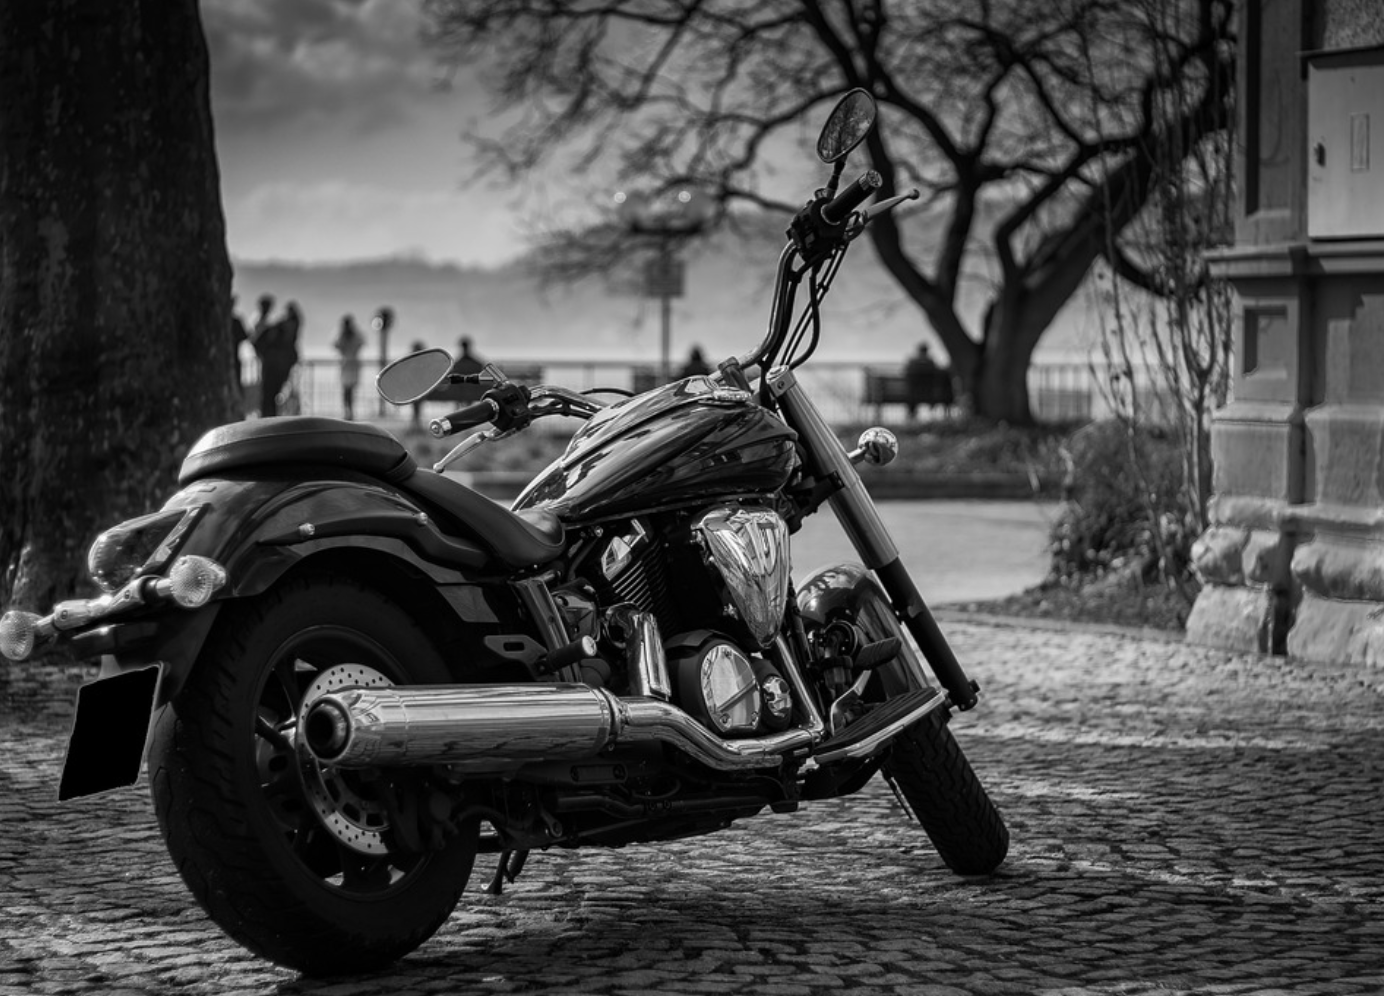 Black and white still of motorcycle; image by LN Photoart, vie Pixabay.com.